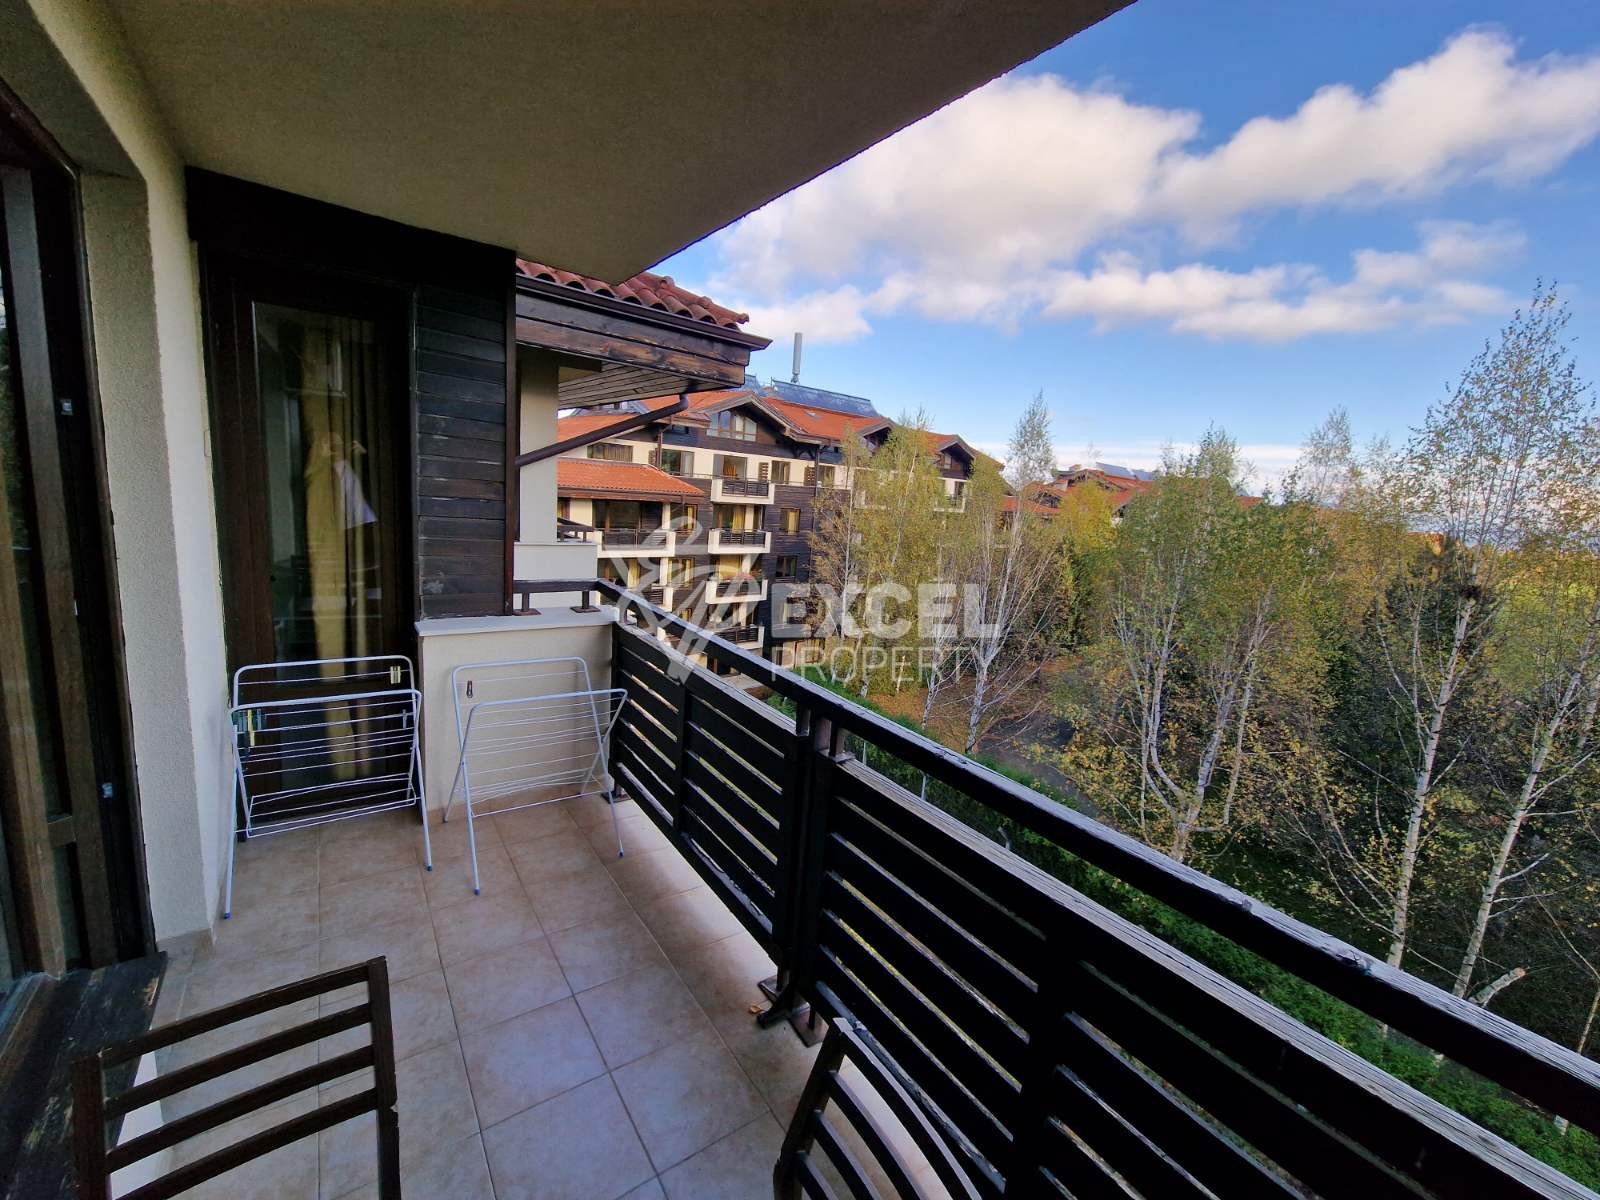 Stunning two-bedroom apartment in a prestigious 4-star complex next to Pirin Golf